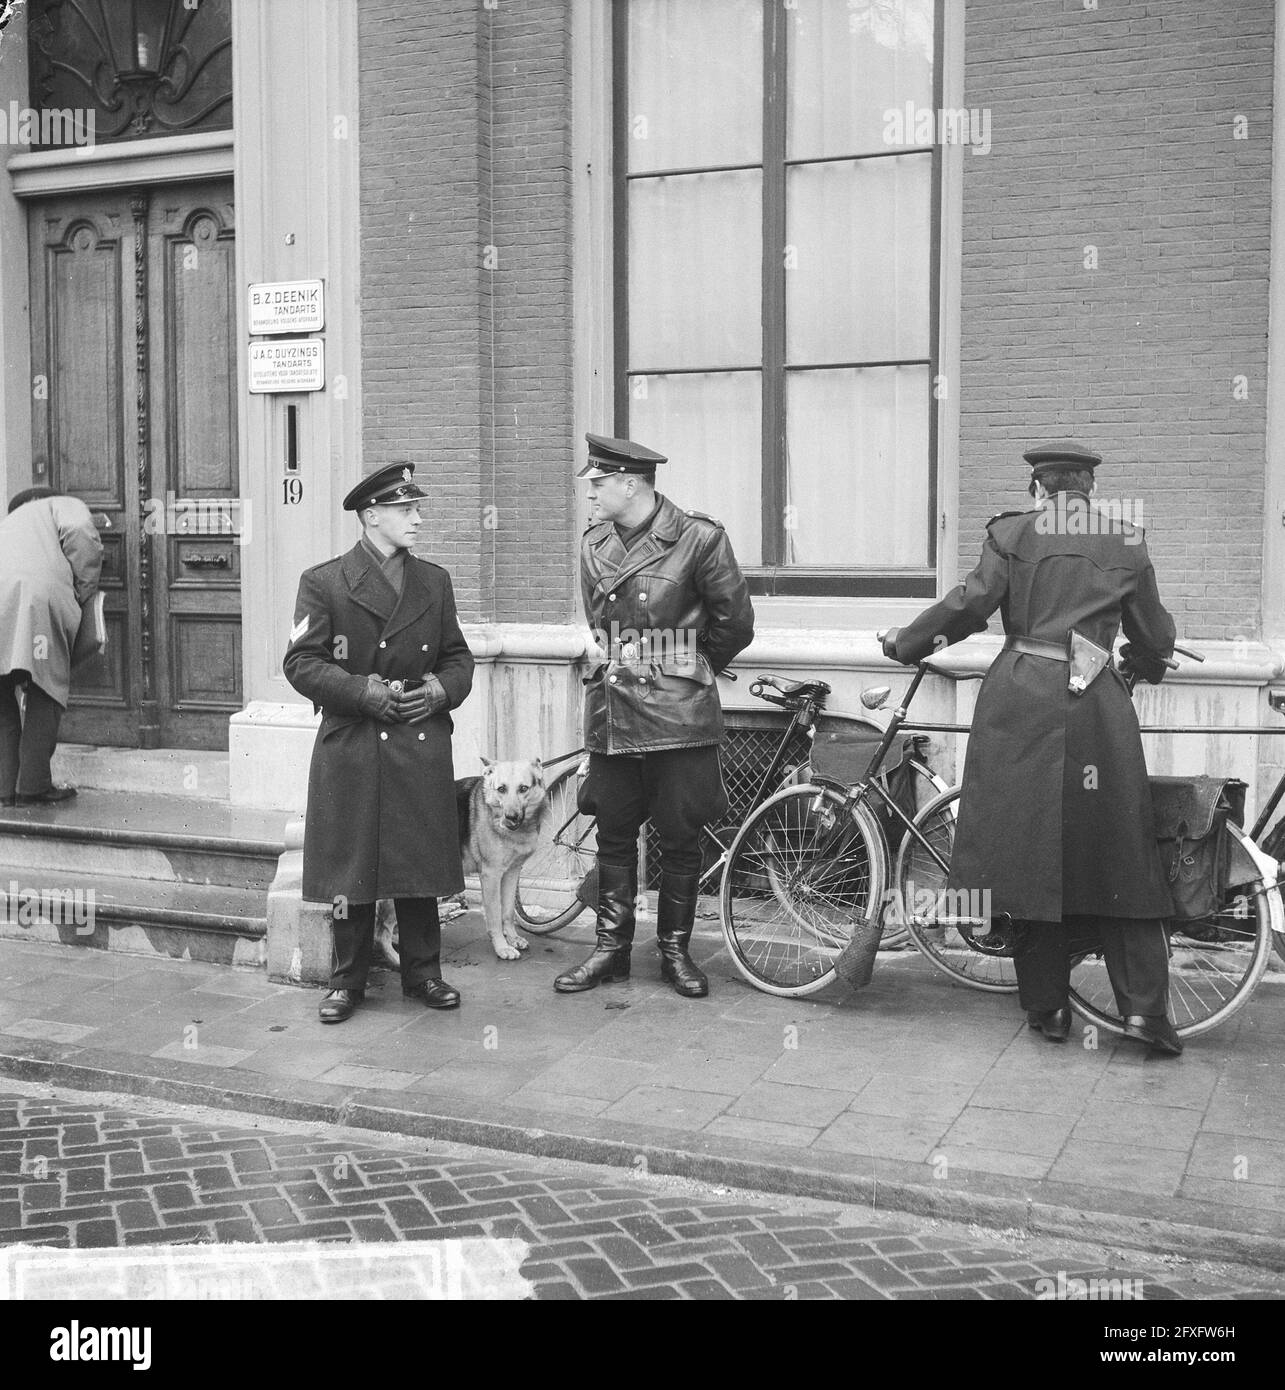 Utrecht. First day hearing Baarn murder case: policemen supervise in Hamburgerstraat near courthouse, 25 March 1963, POLICE, murder, justice, supervision, uniforms, The Netherlands, 20th century press agency photo, news to remember, documentary, historic photography 1945-1990, visual stories, human history of the Twentieth Century, capturing moments in time Stock Photo